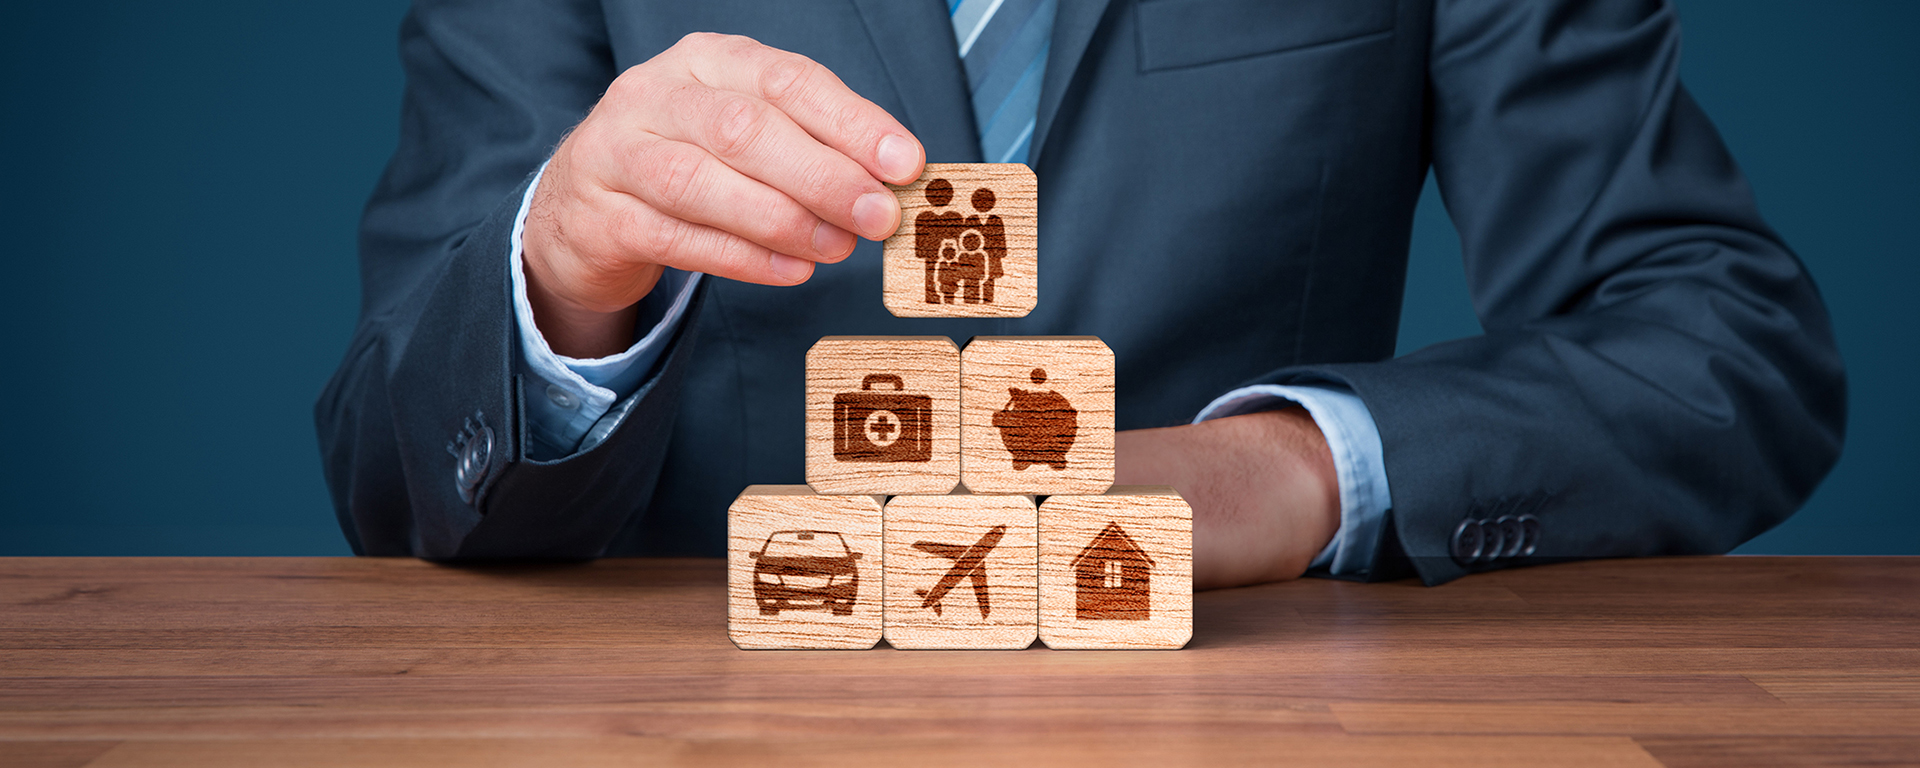 Insurance concept. Blocks with house, car, family, airplane and health symbol on them. 